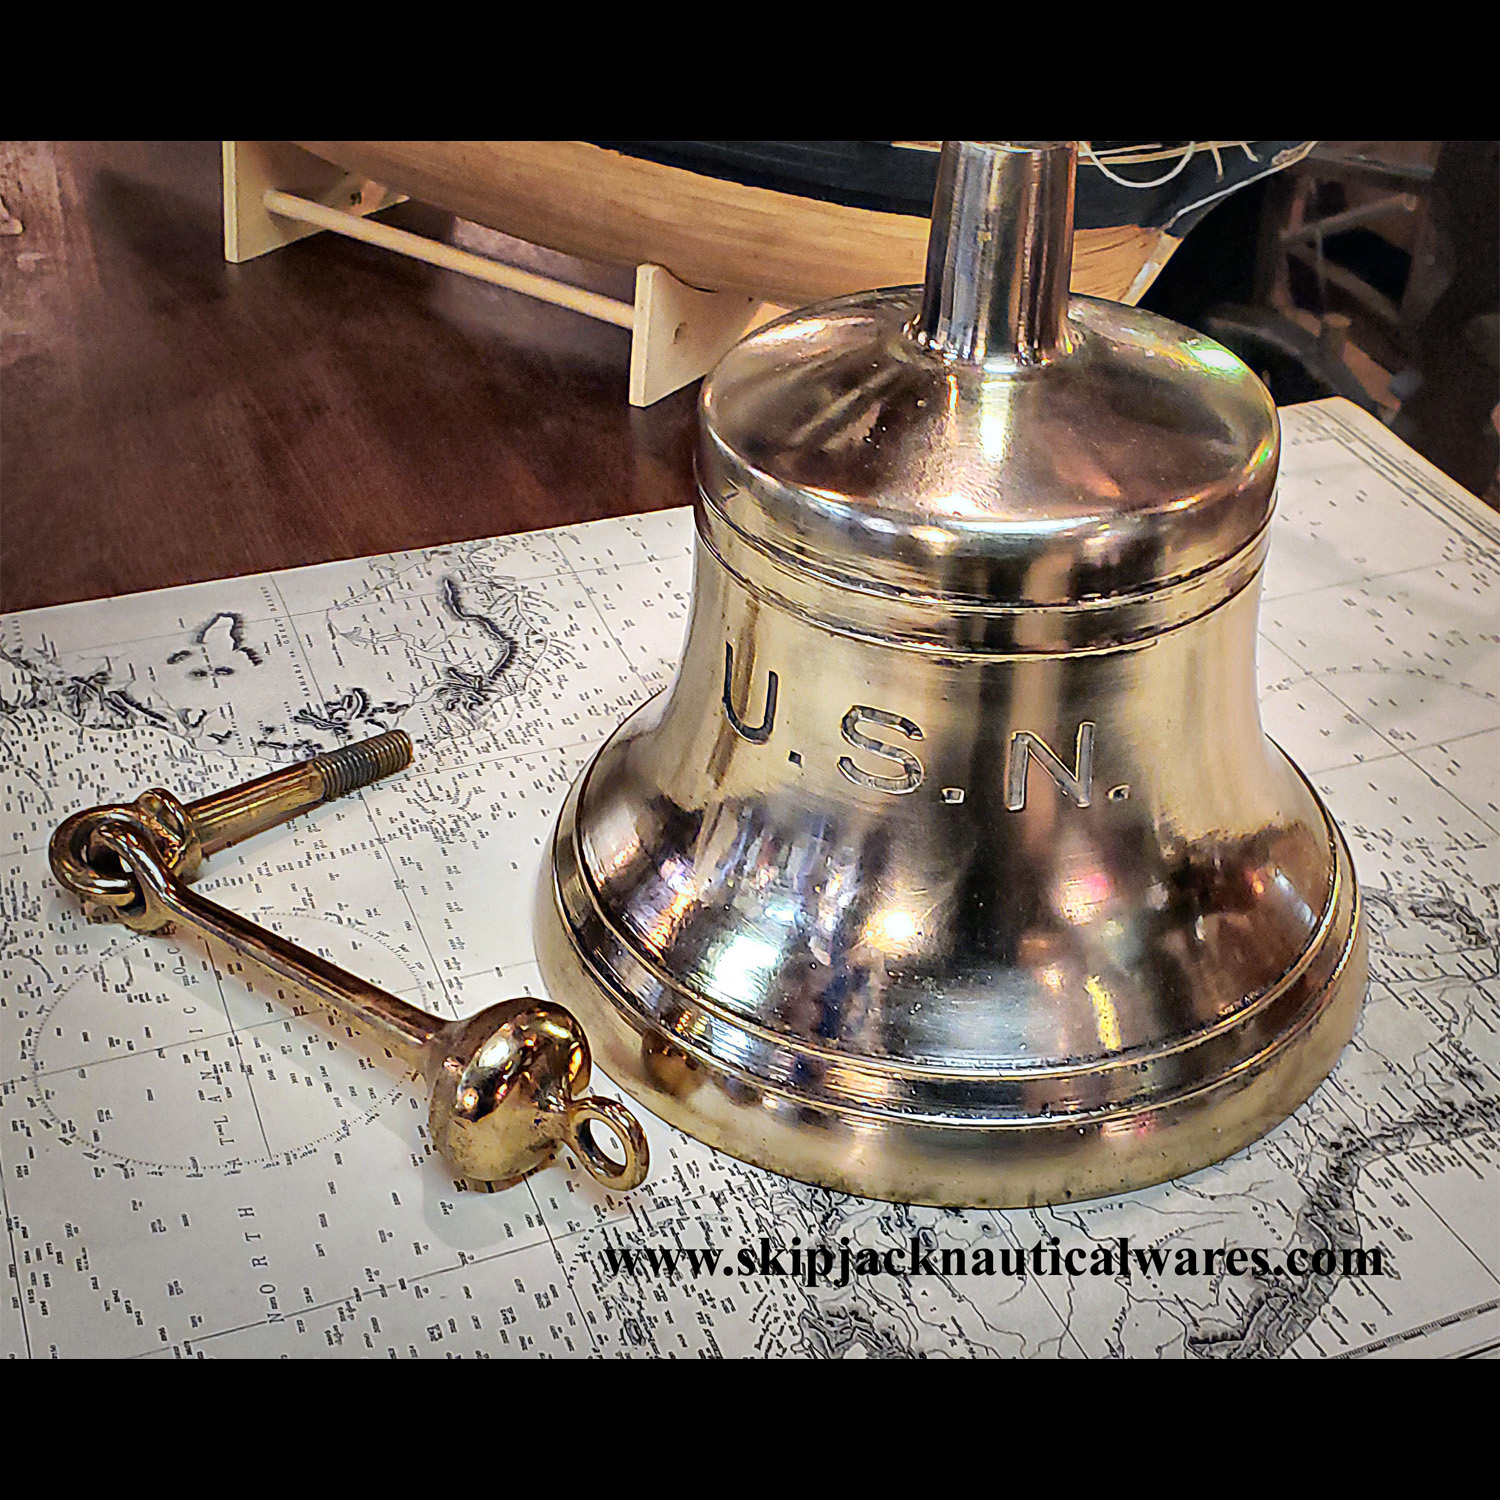 https://www.skipjackmarinegallery.com/mm5/graphics/00000001/3/U_S_N_US_navy_ships_bell_bronze_foredeck_anchor_brass_aluminum_co_authentic_antique_22104_clapper.jpg